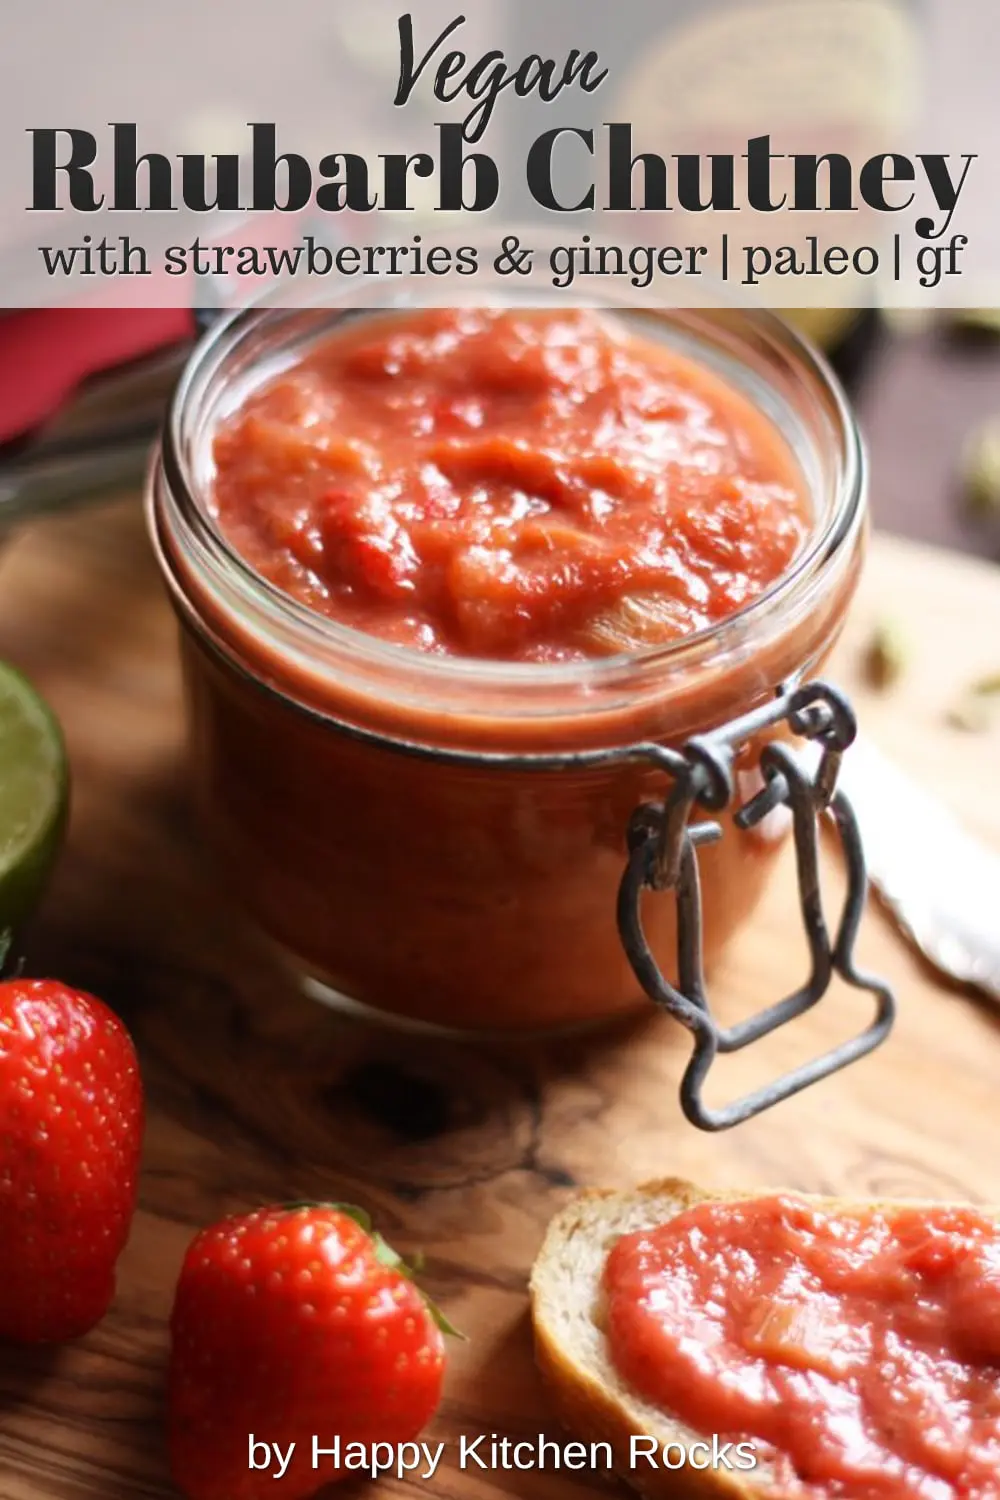 Rhubarb Chutney with Strawberries and Ginger Collage with Text Overlay